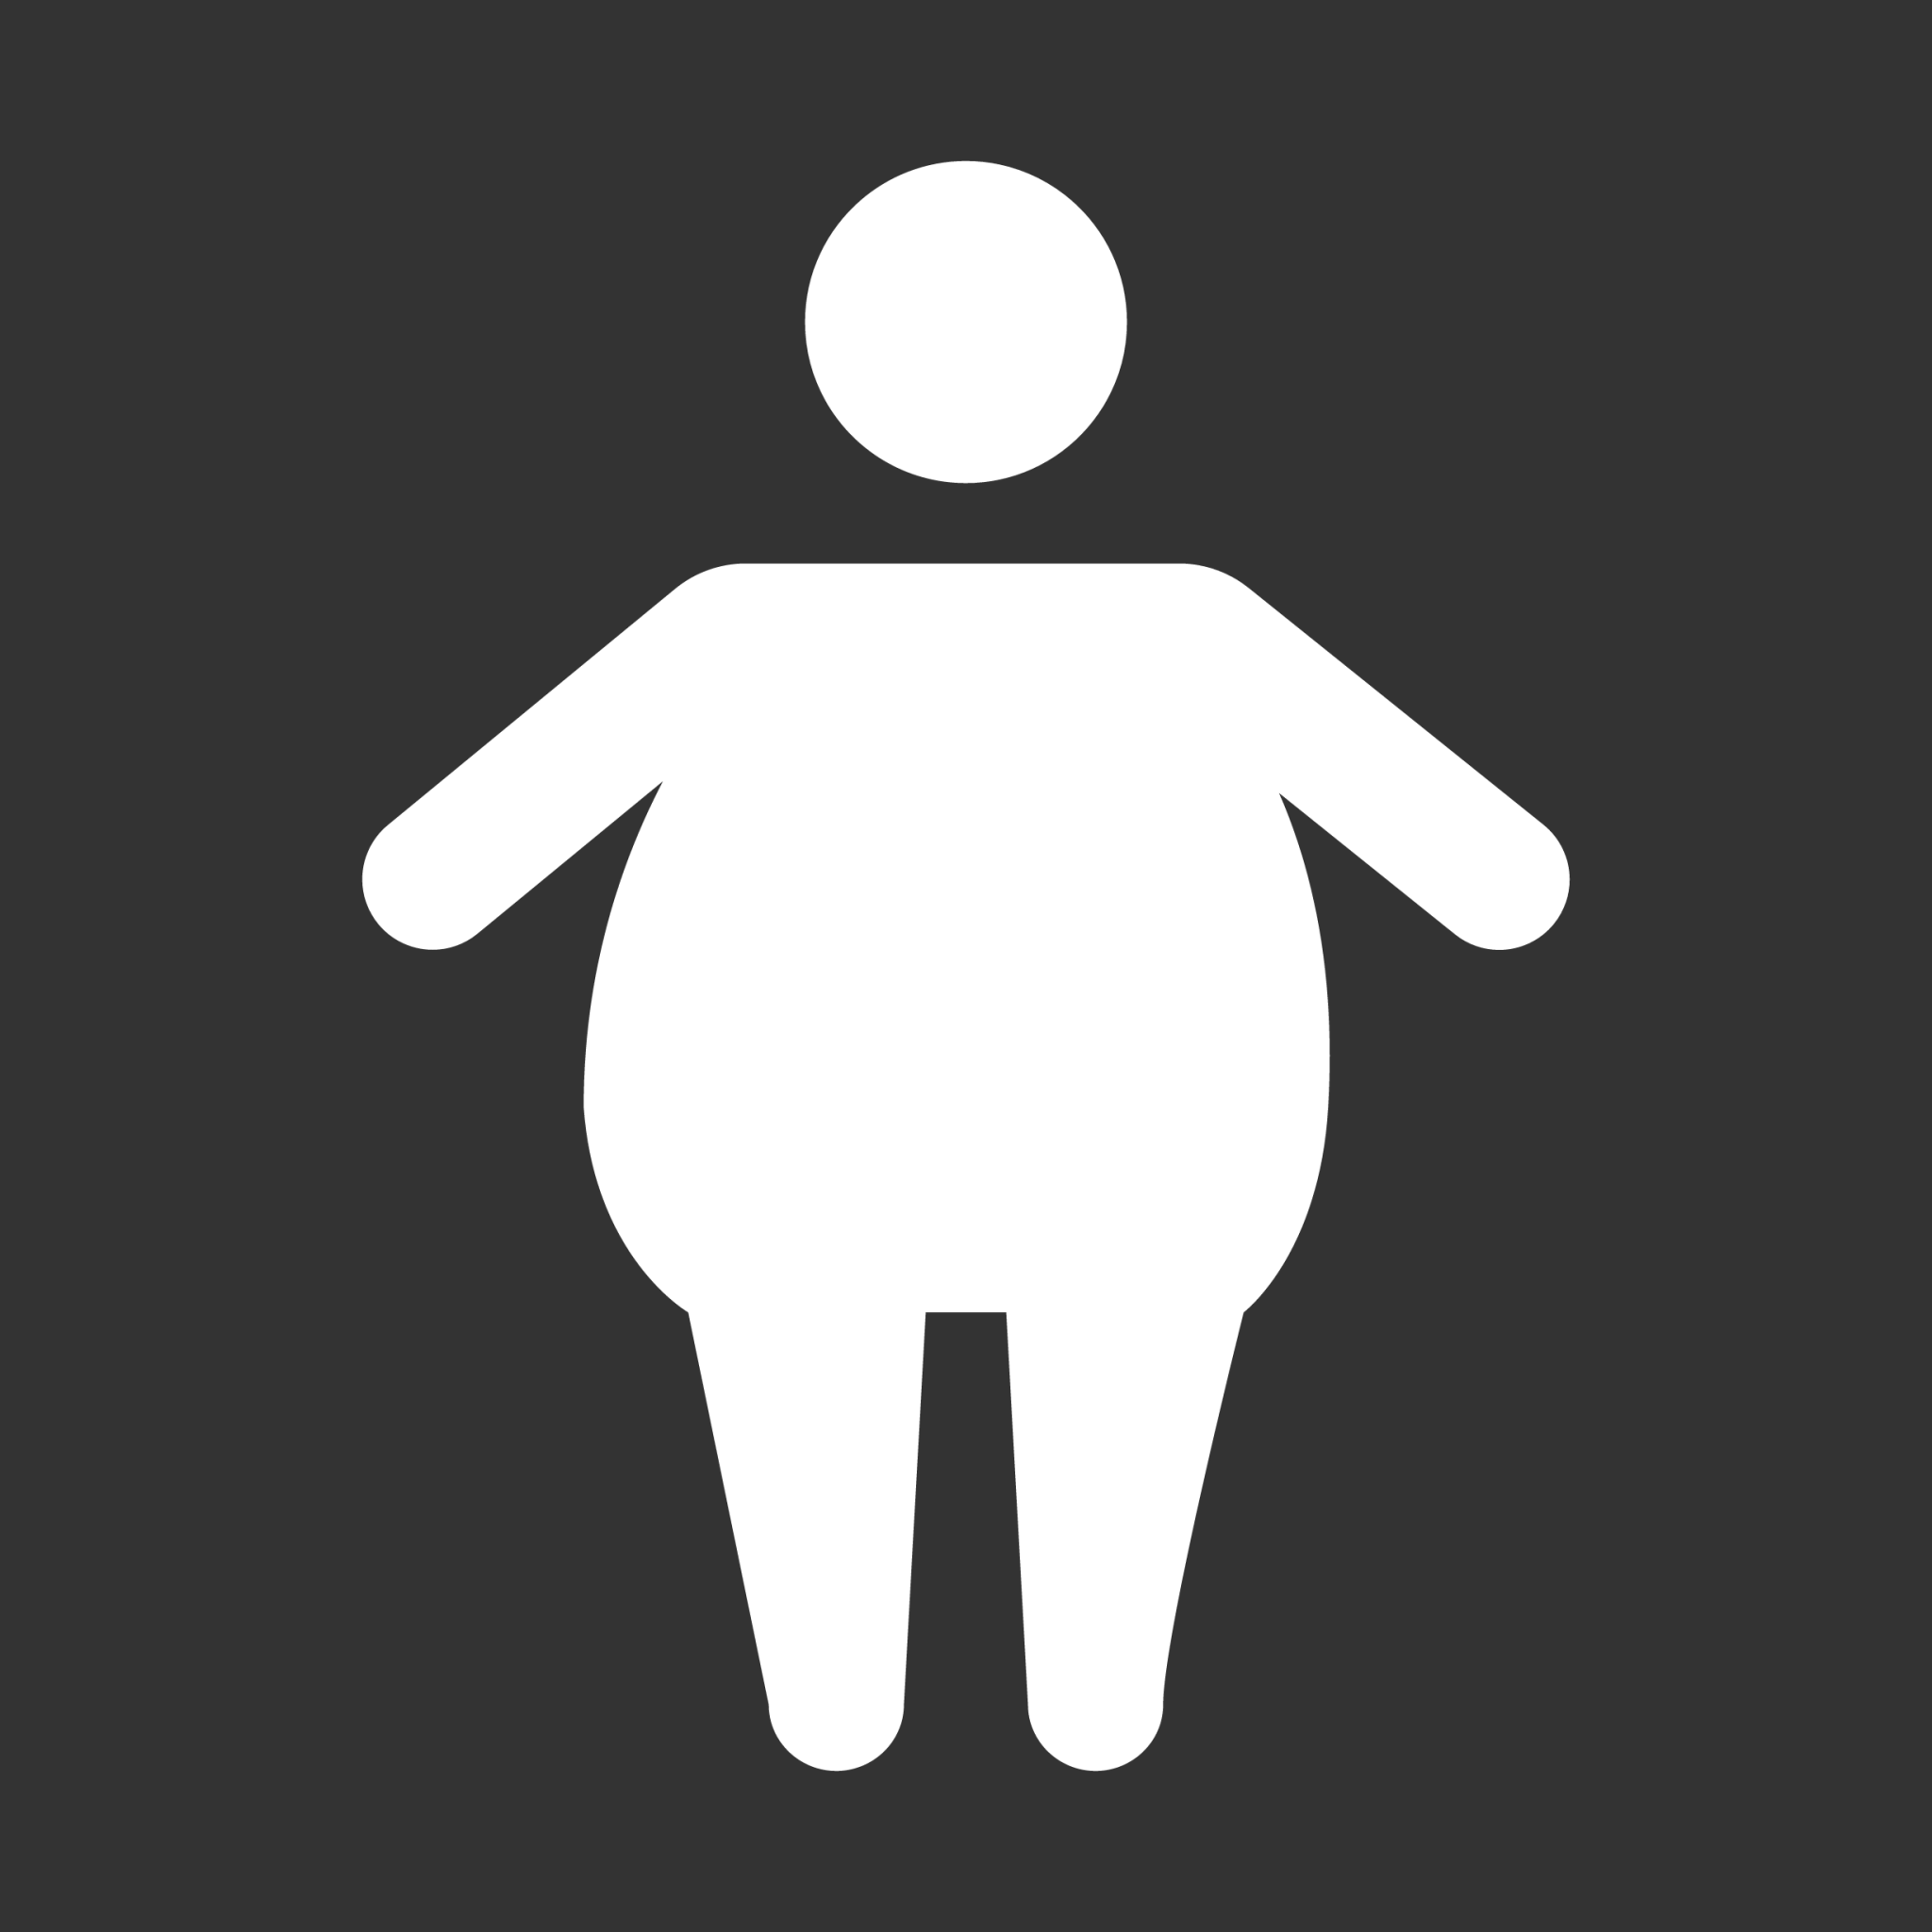 Overweight icon